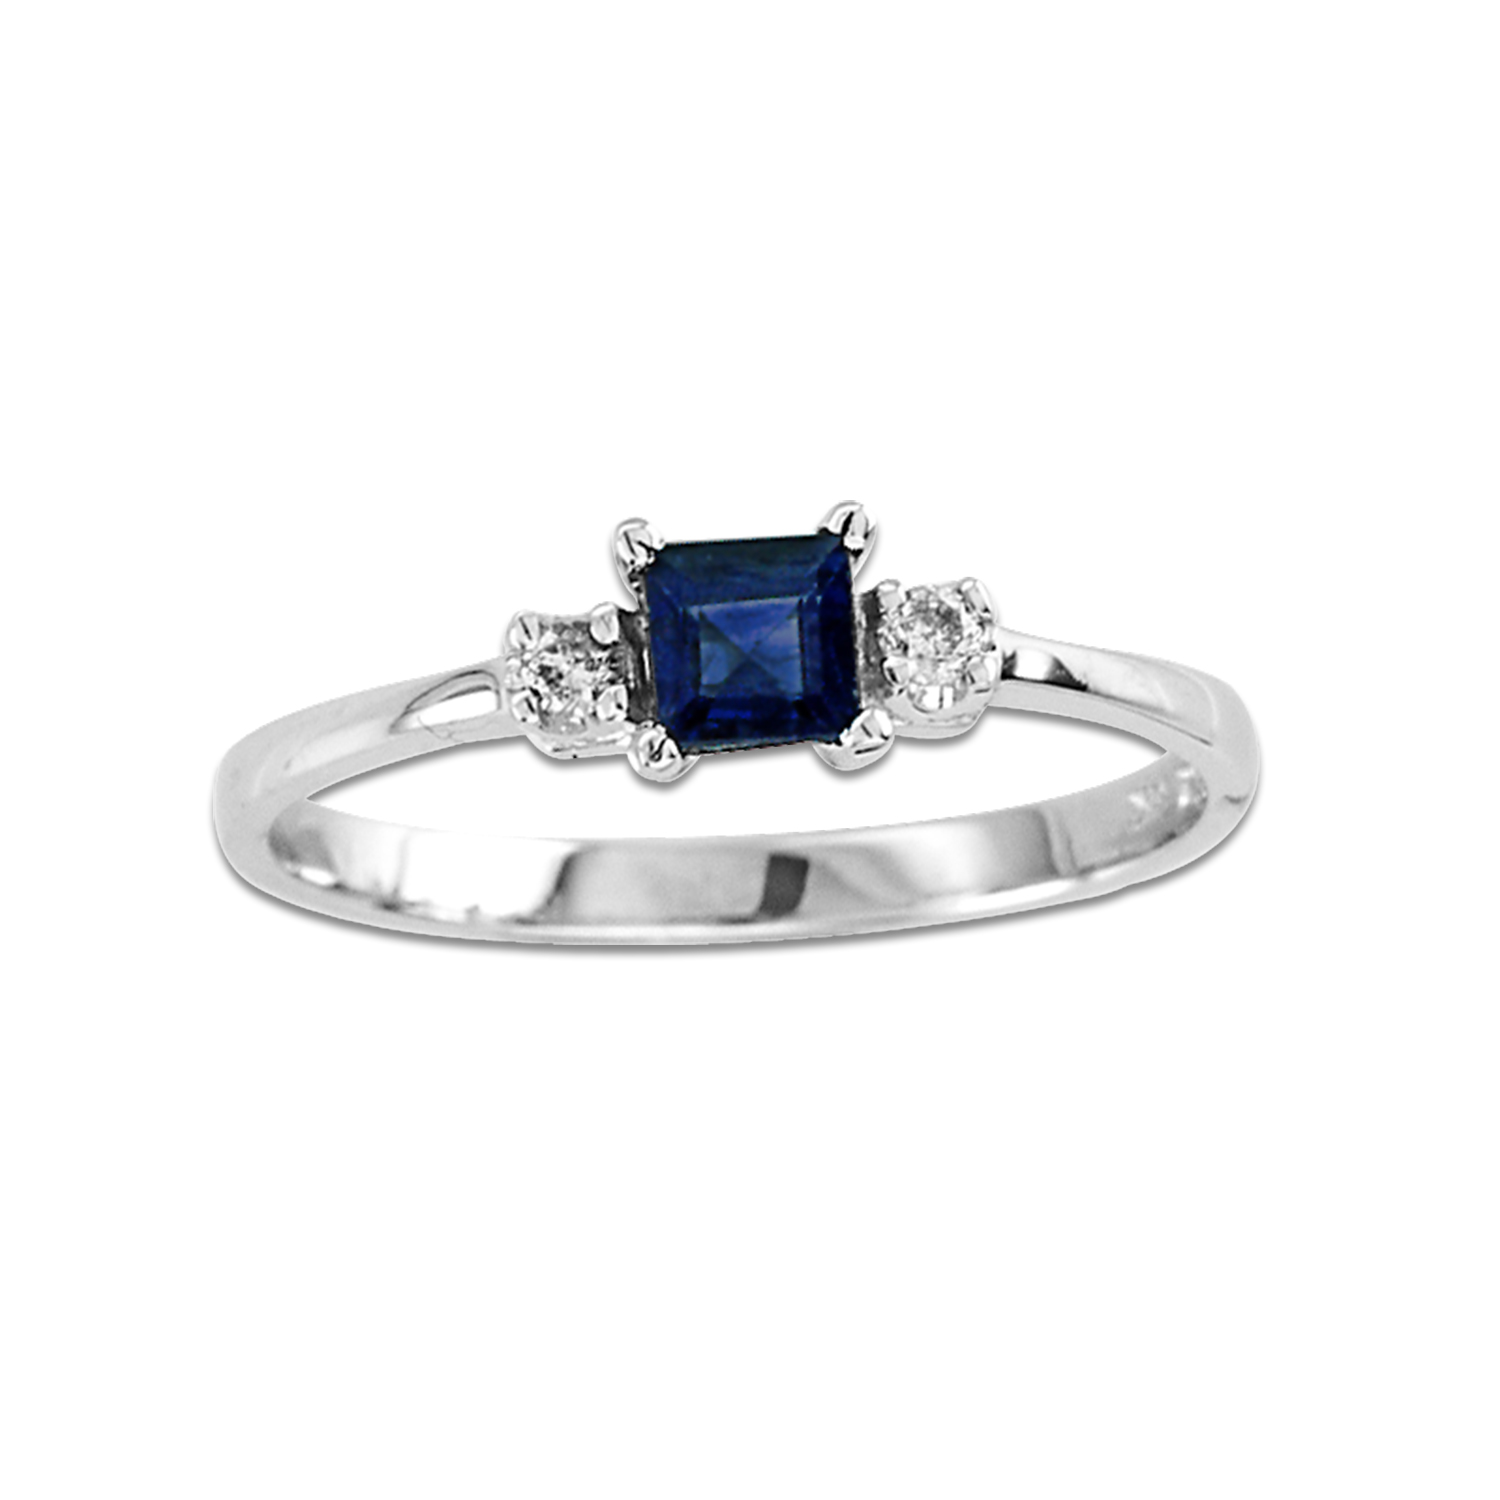 0.46cttw Diamond and Square Sapphire Ring set in 14k Gold